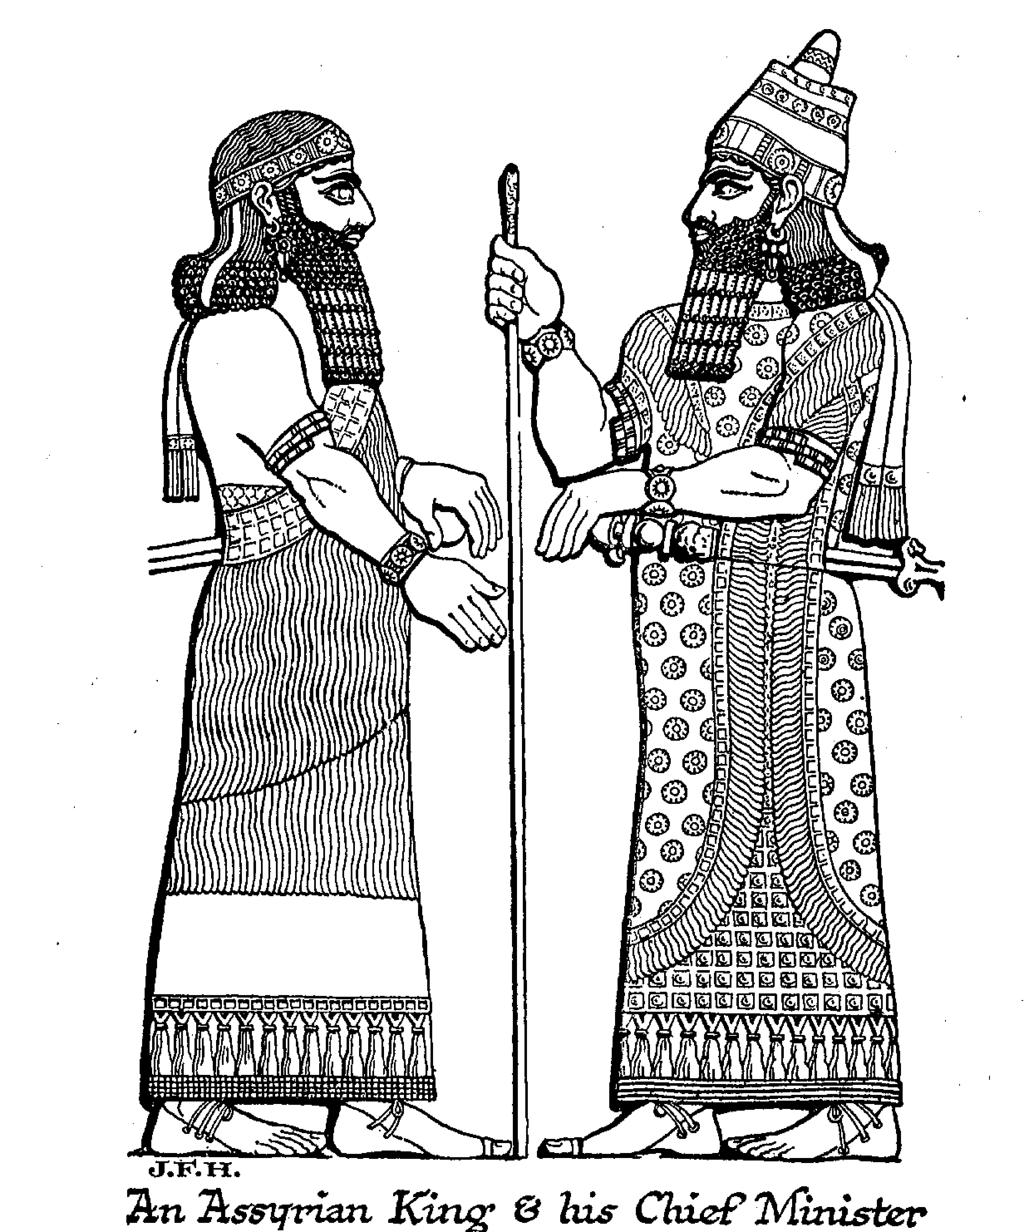 The Sumerians believed the gods had great powers. The gods could bring a good harvest or a disastrous flood. They could bring illness or good health.